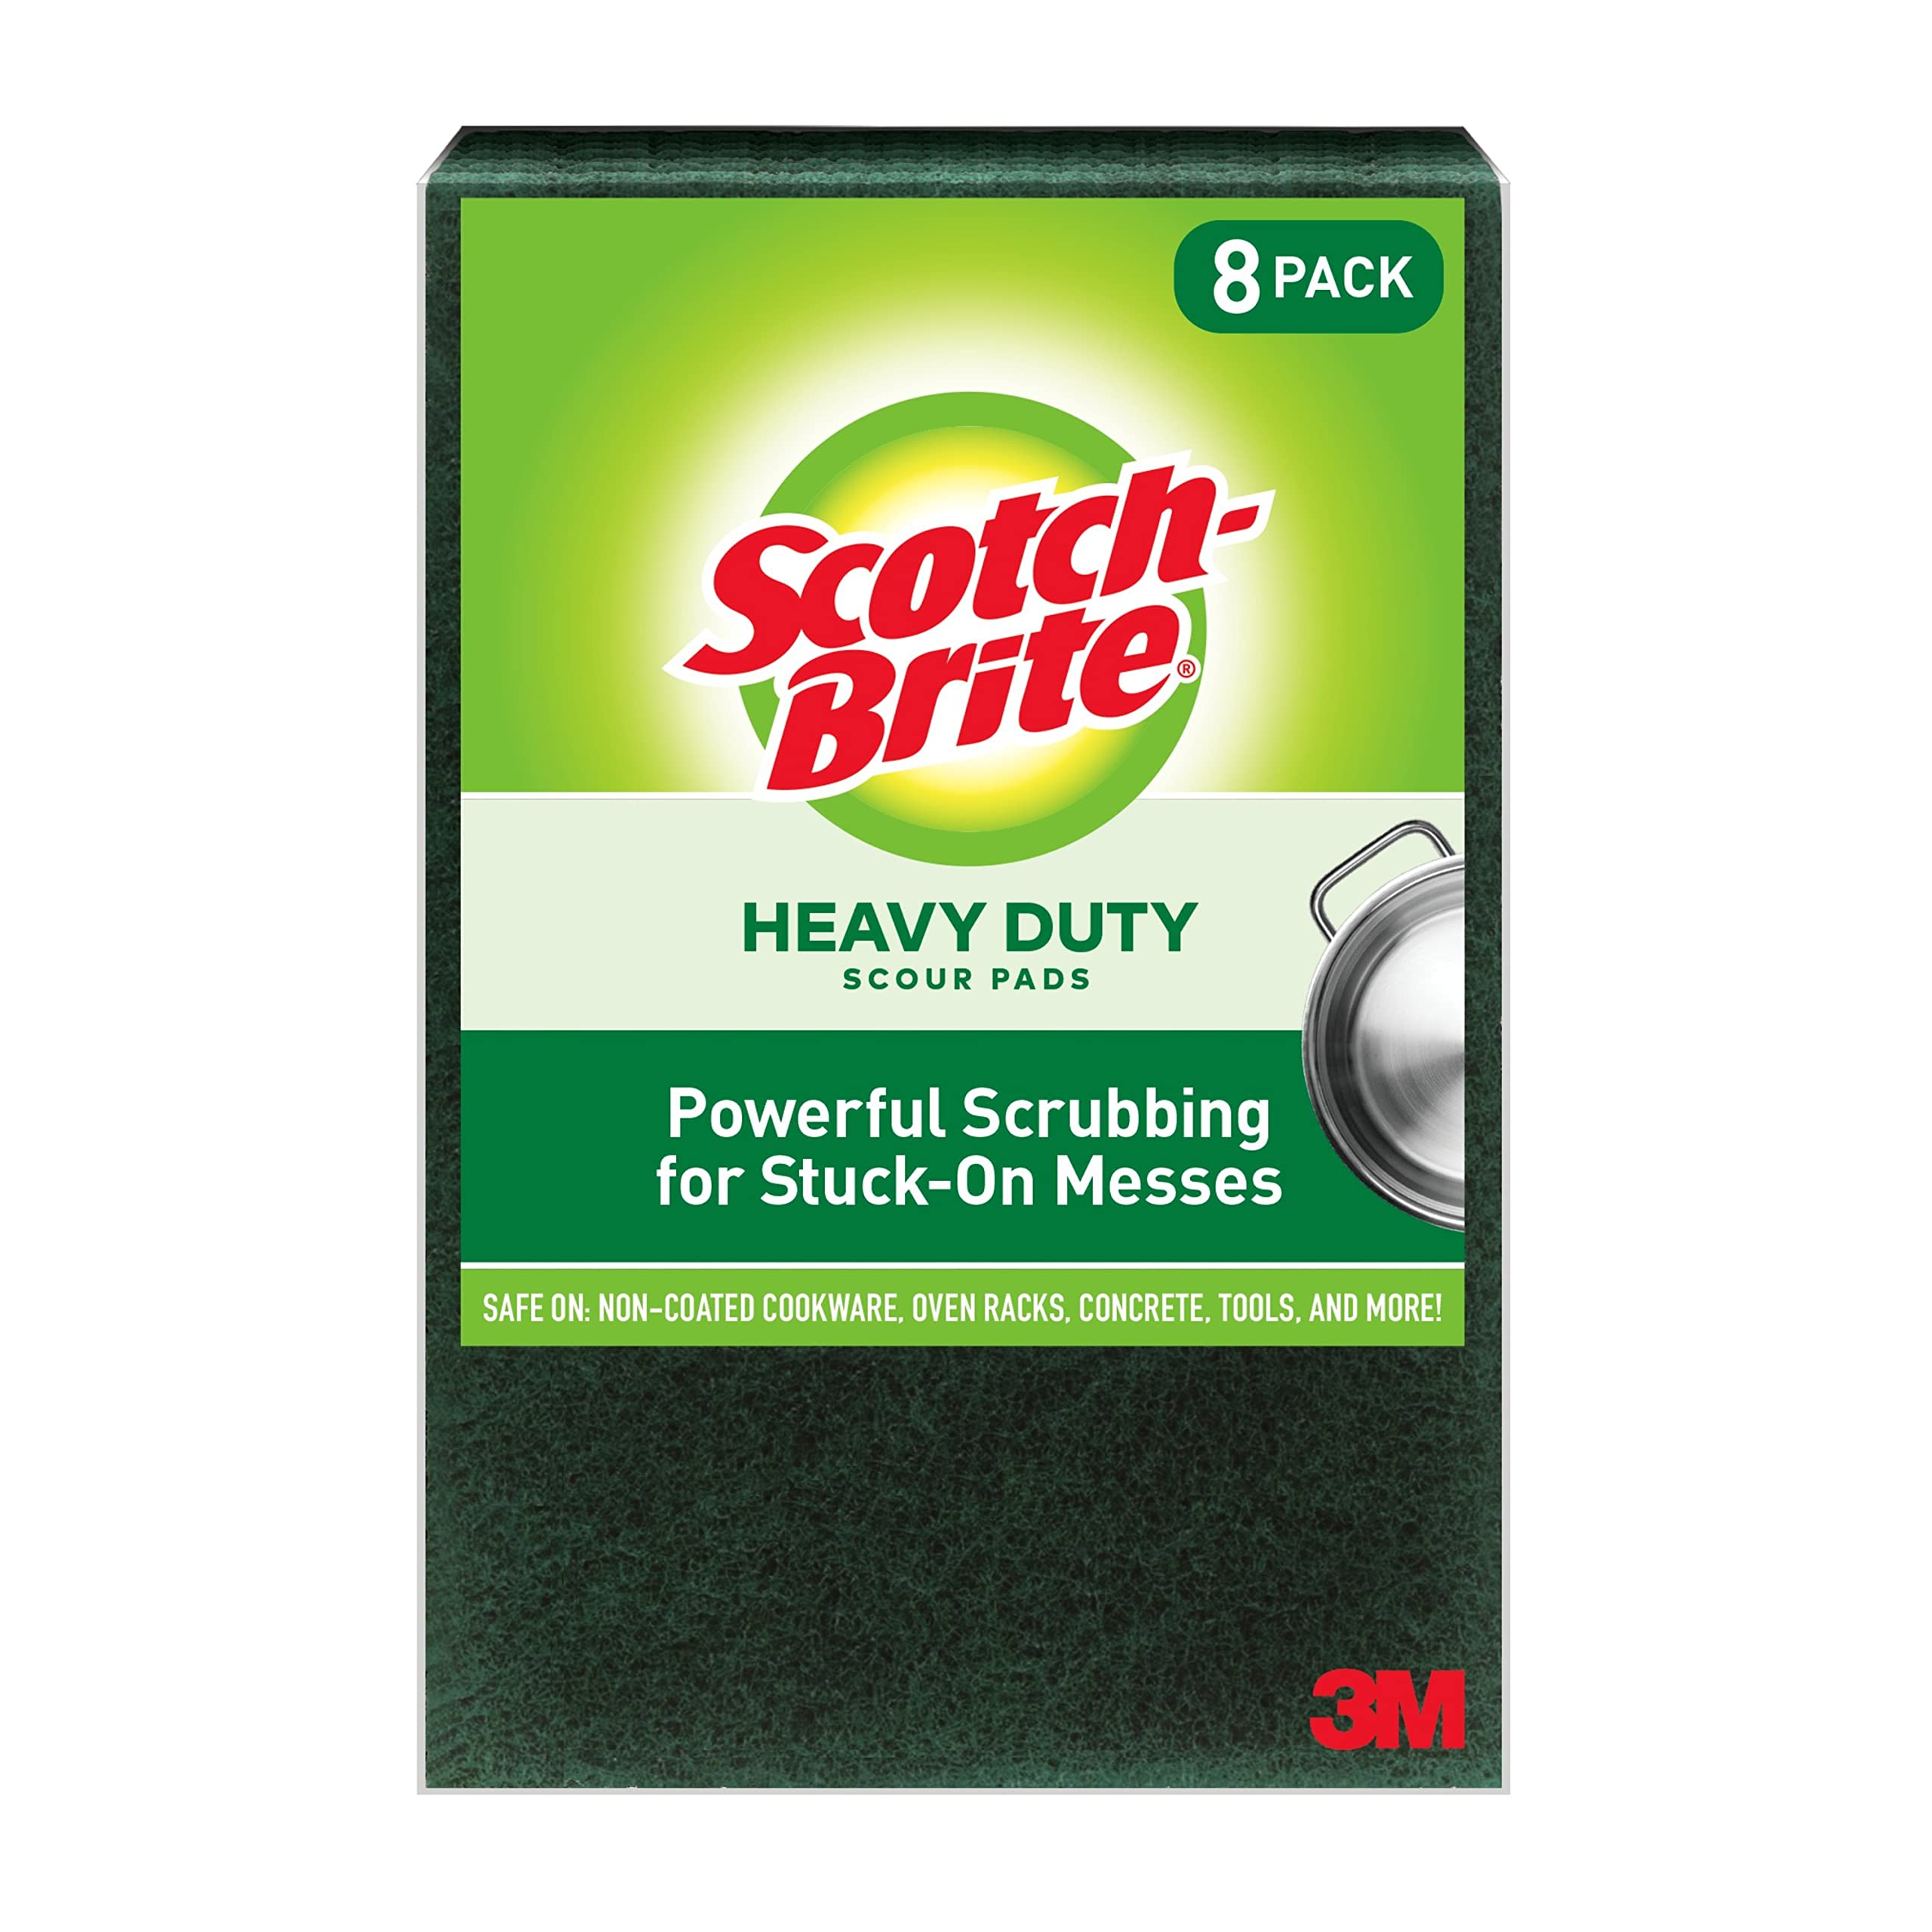 8-Pack Scotch-Brite Heavy Duty Scour Pads (Green) $4.50 ($0.56 Each) + Free Shipping w/ Prime or on $25+